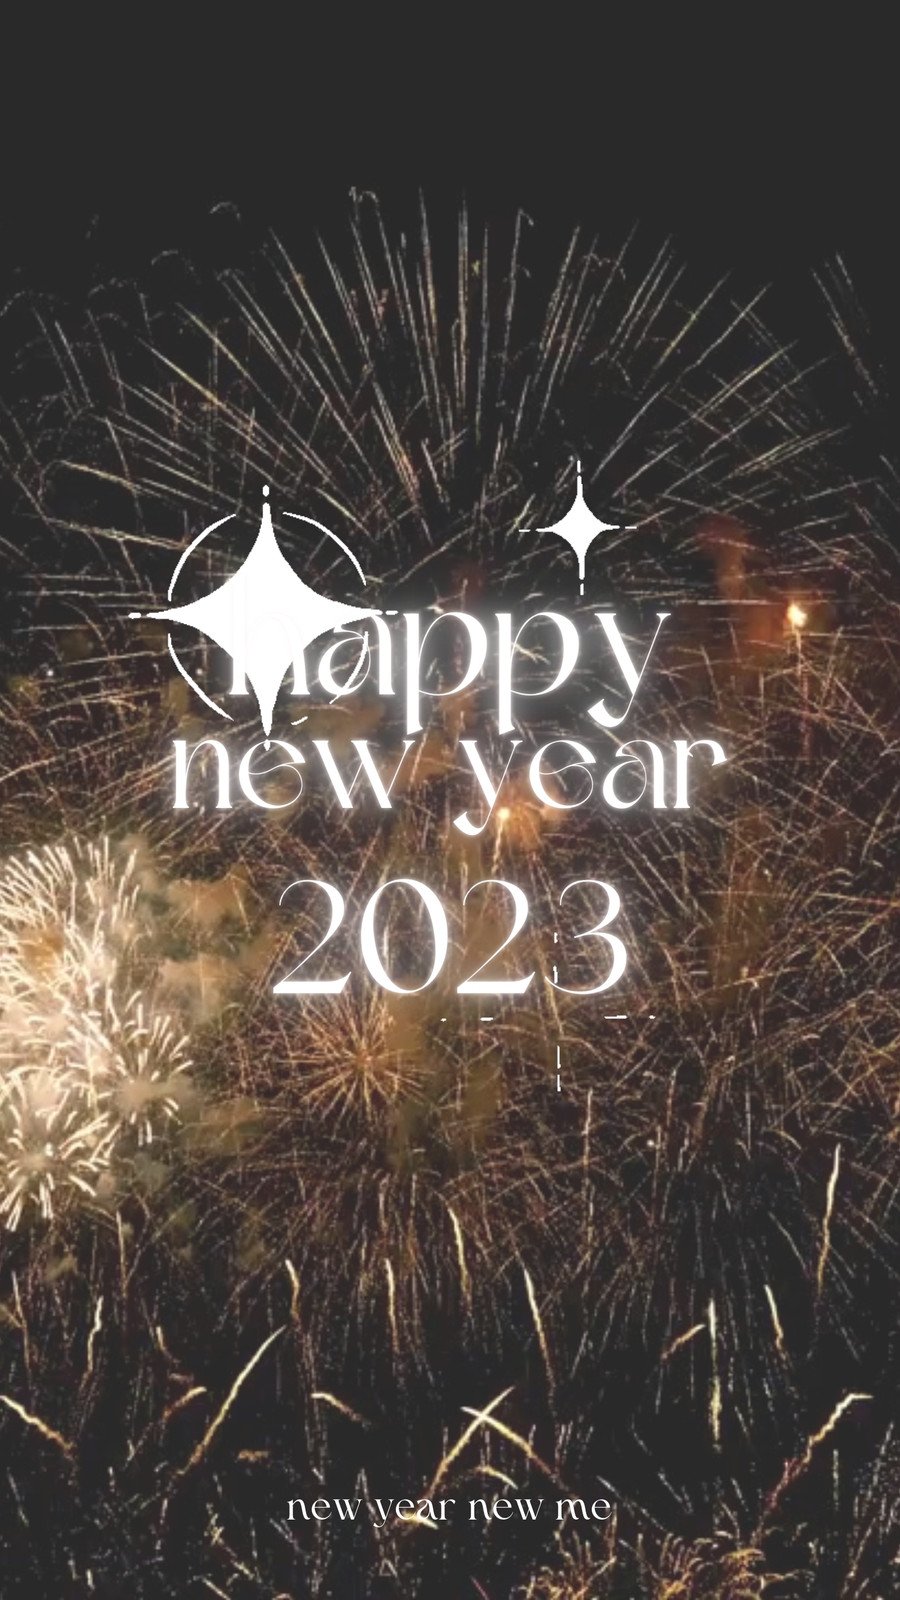 Buy Happy New Years Wallpaper iPhone New Years Online in India  Etsy